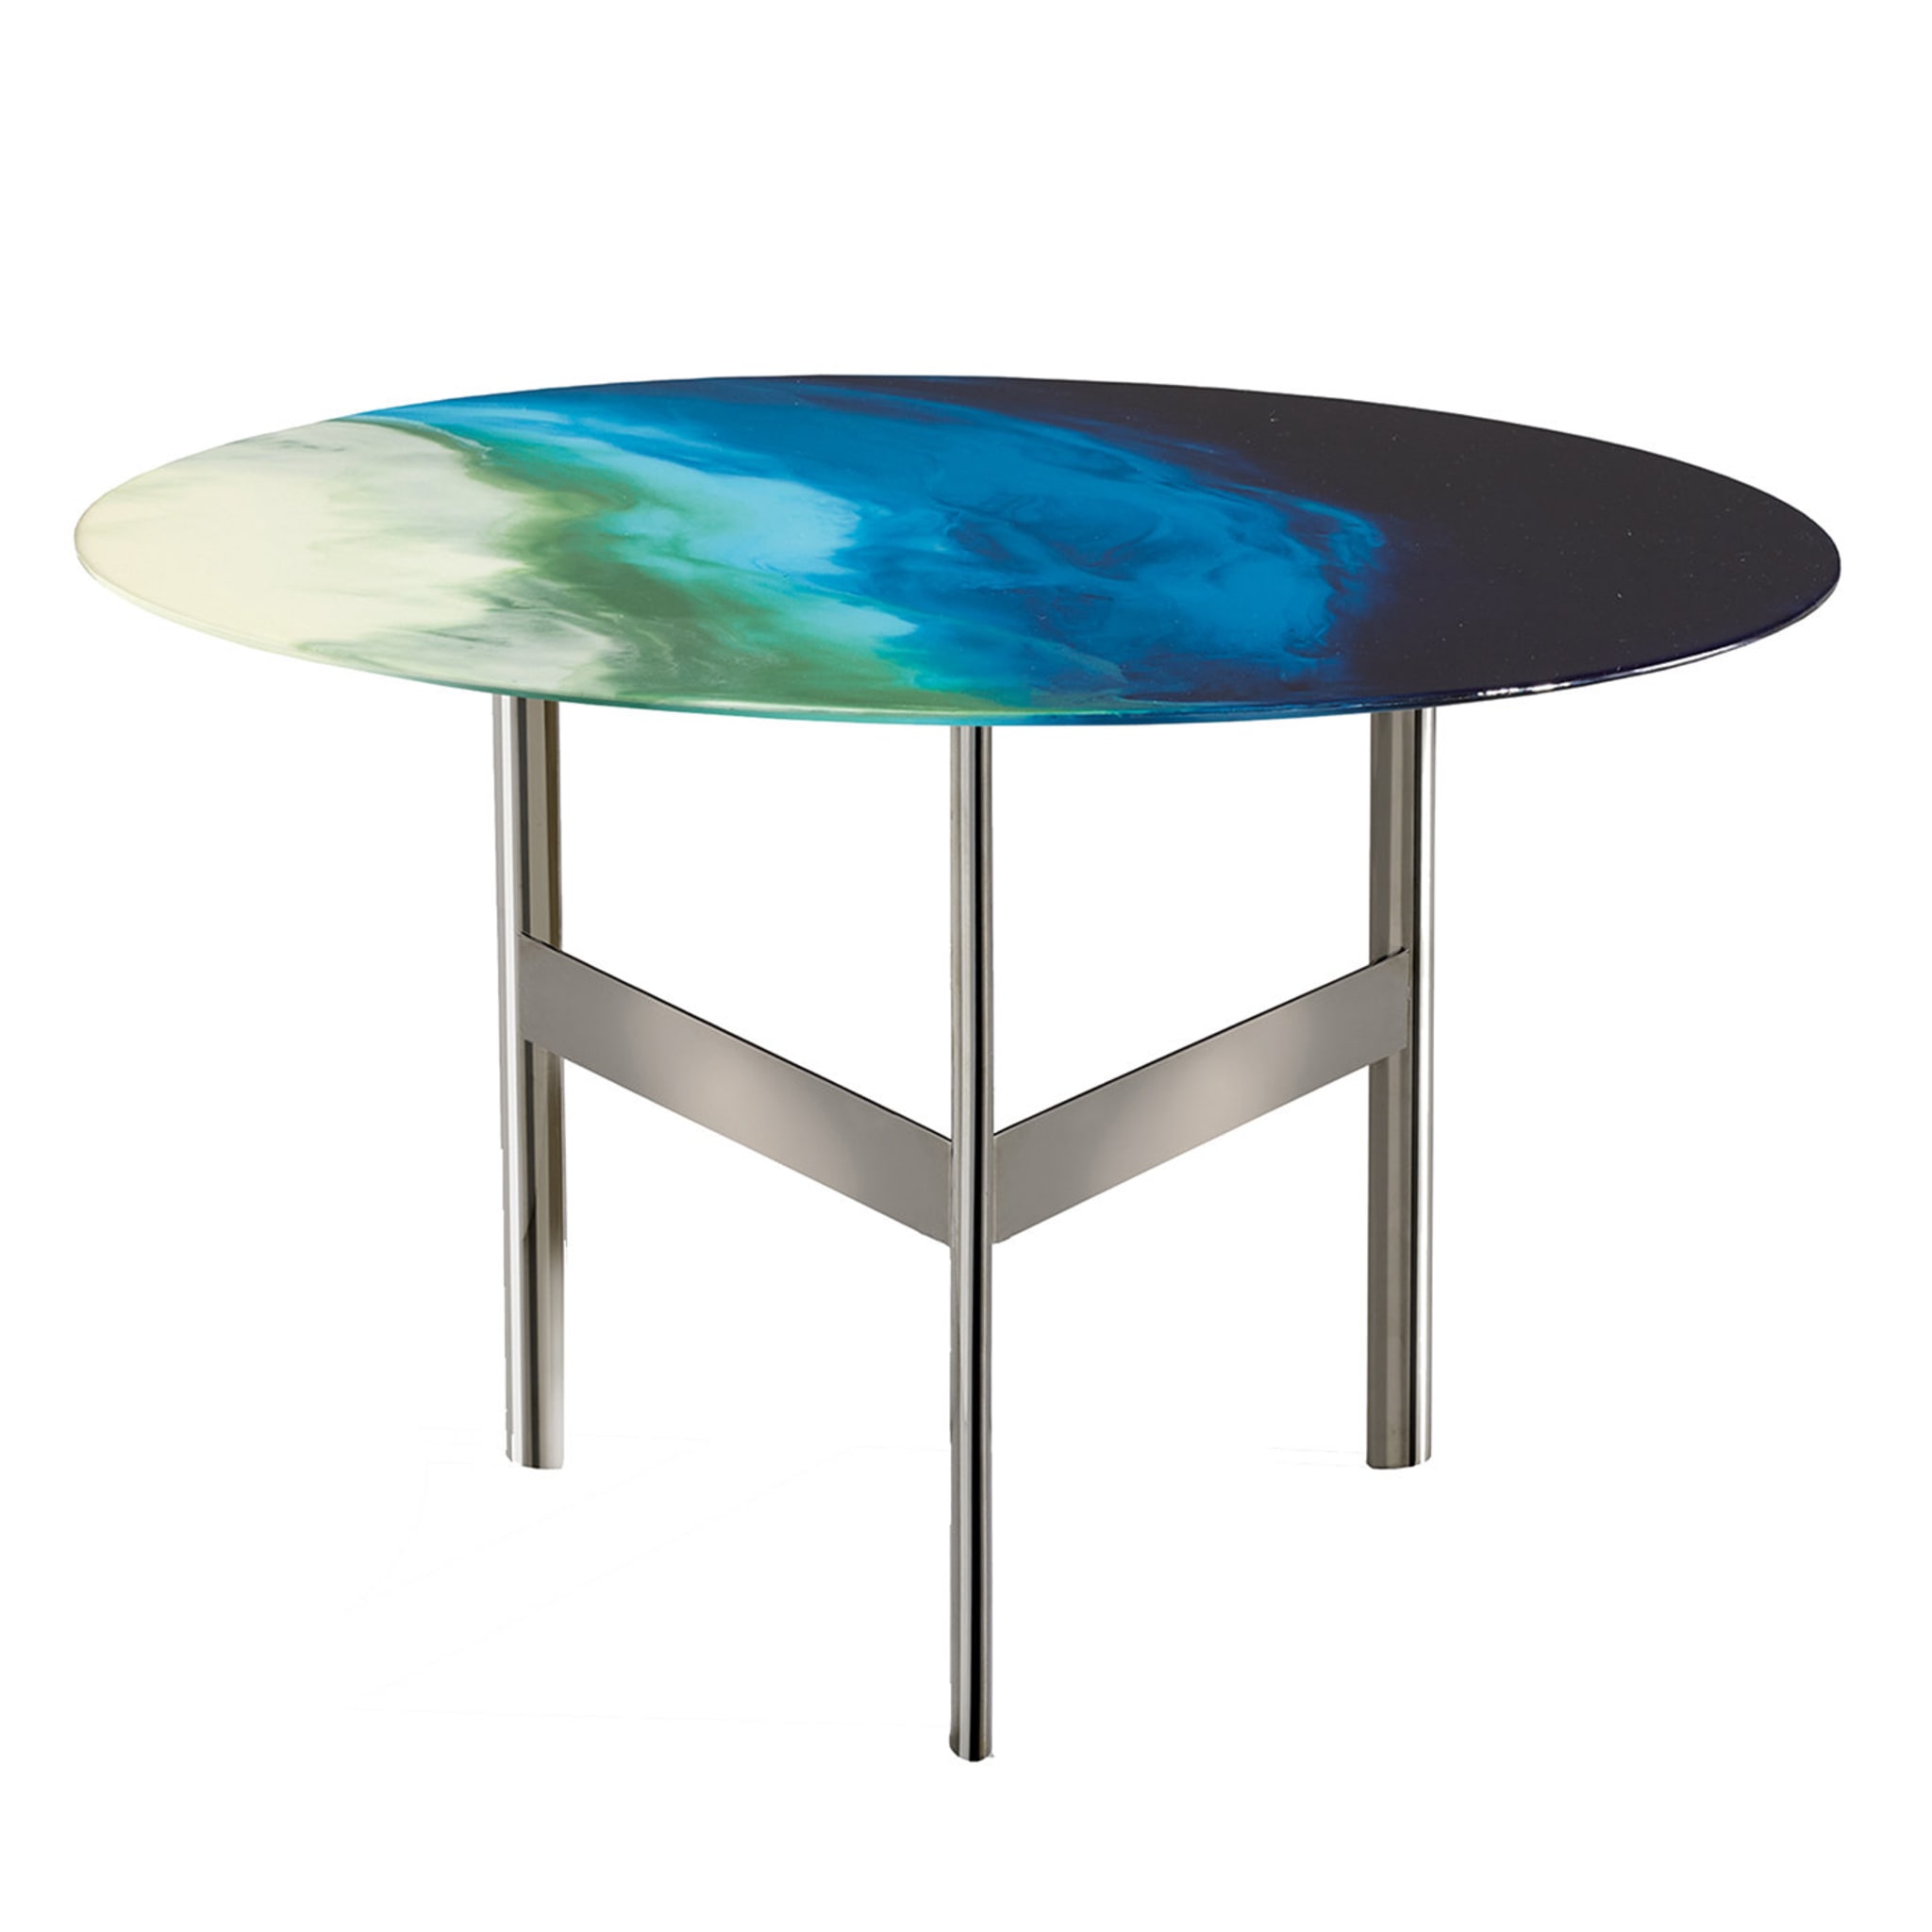 ART GLASS BLUE LARGE SIDE TABLE - Main view